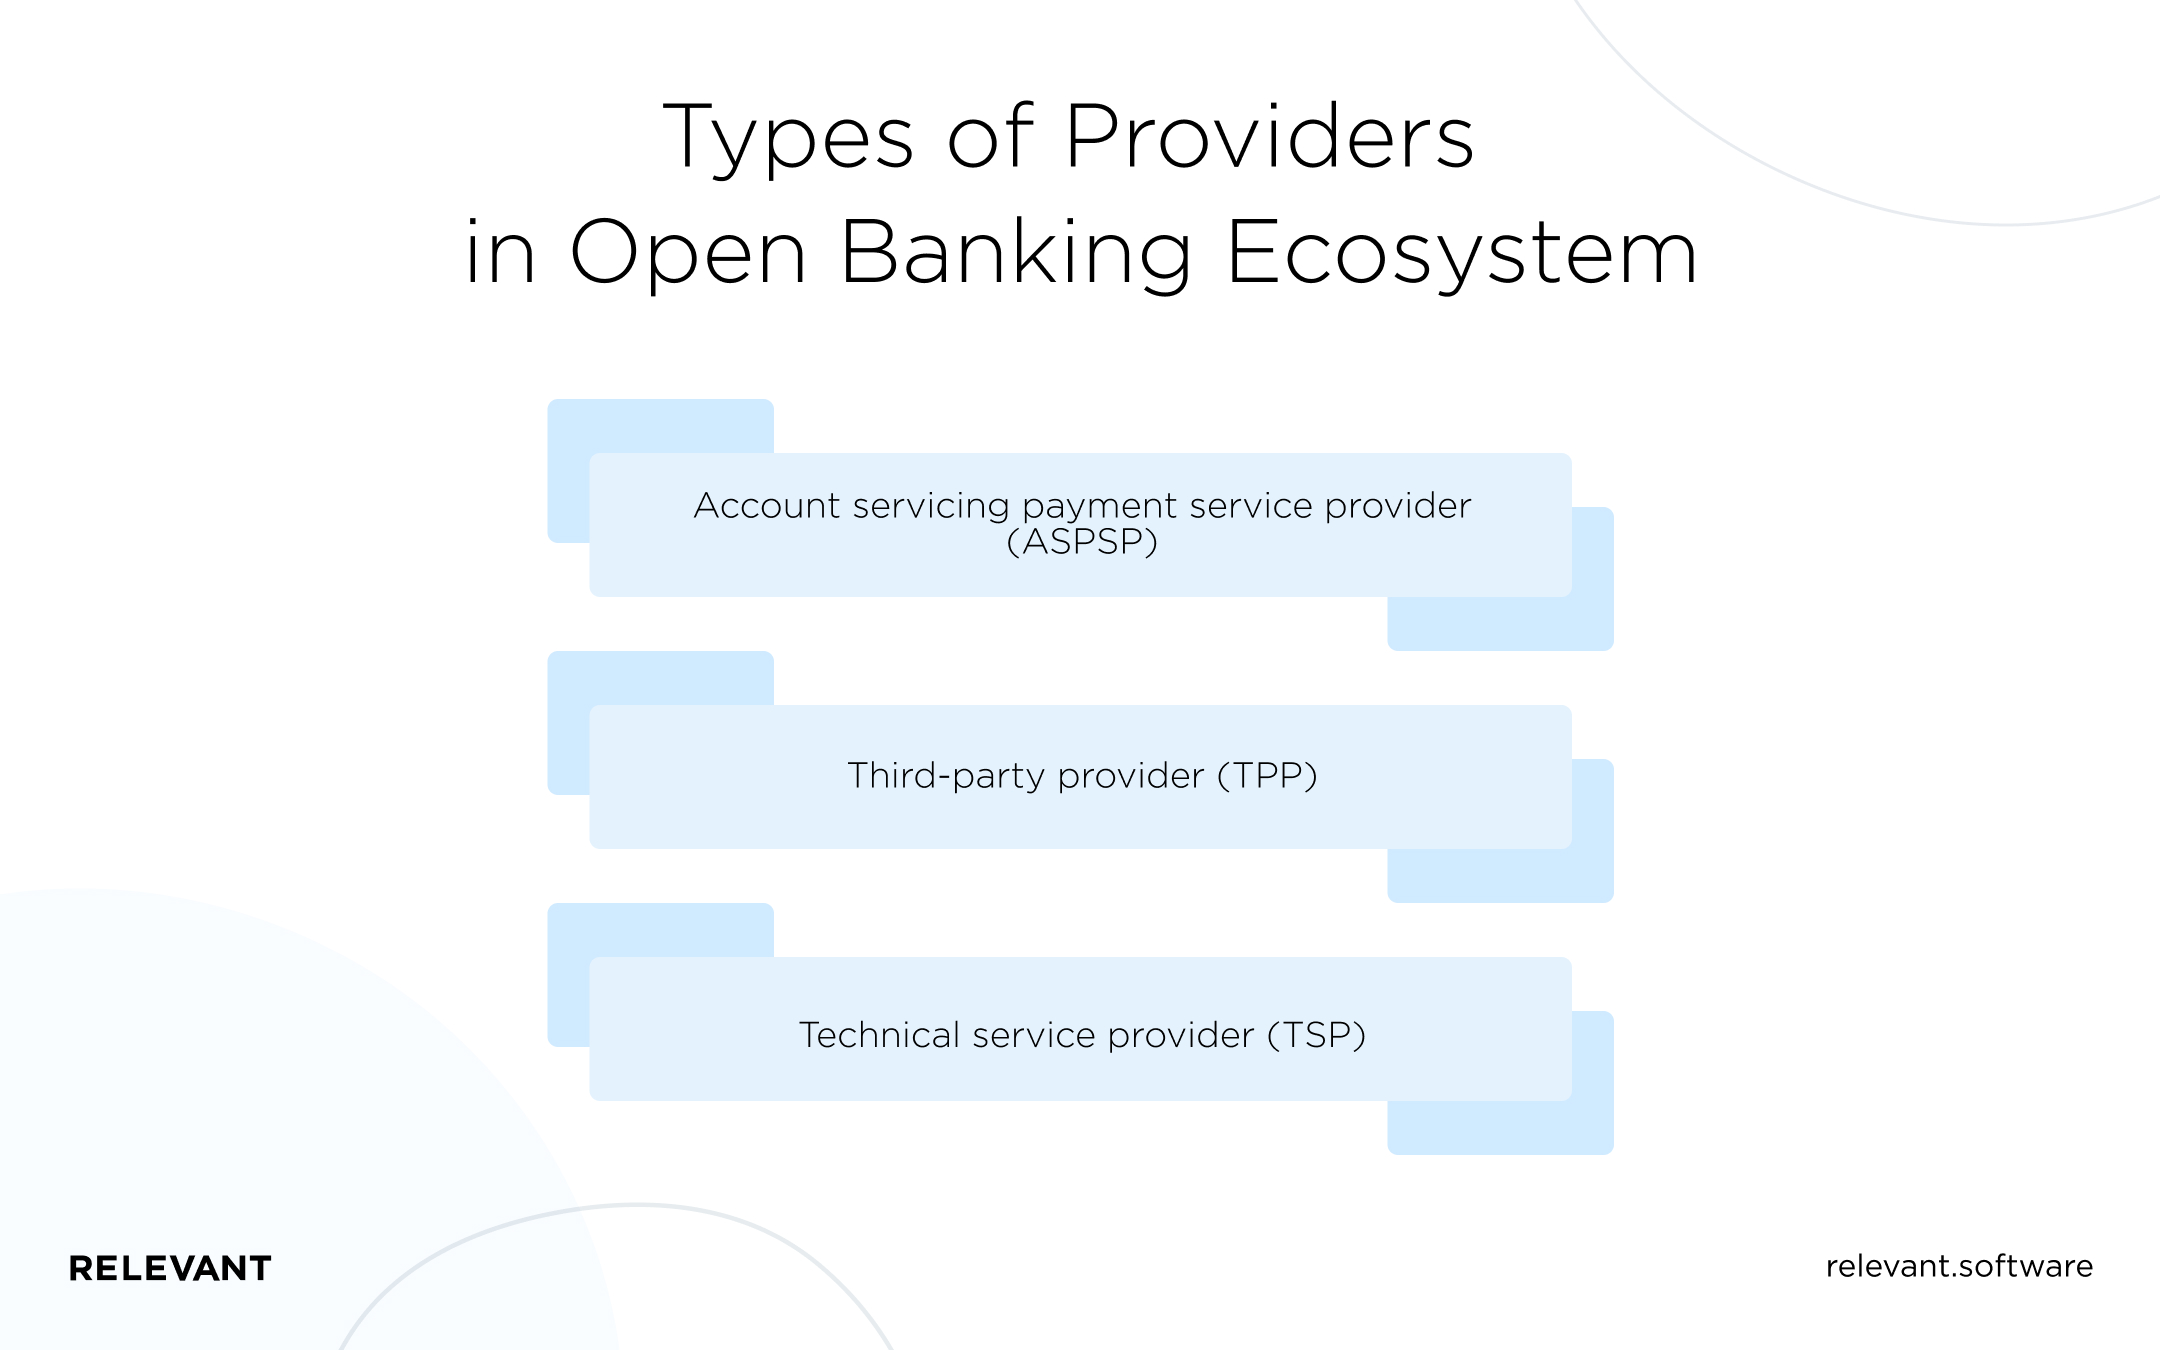 Types of Providers in Open Banking Ecosystem